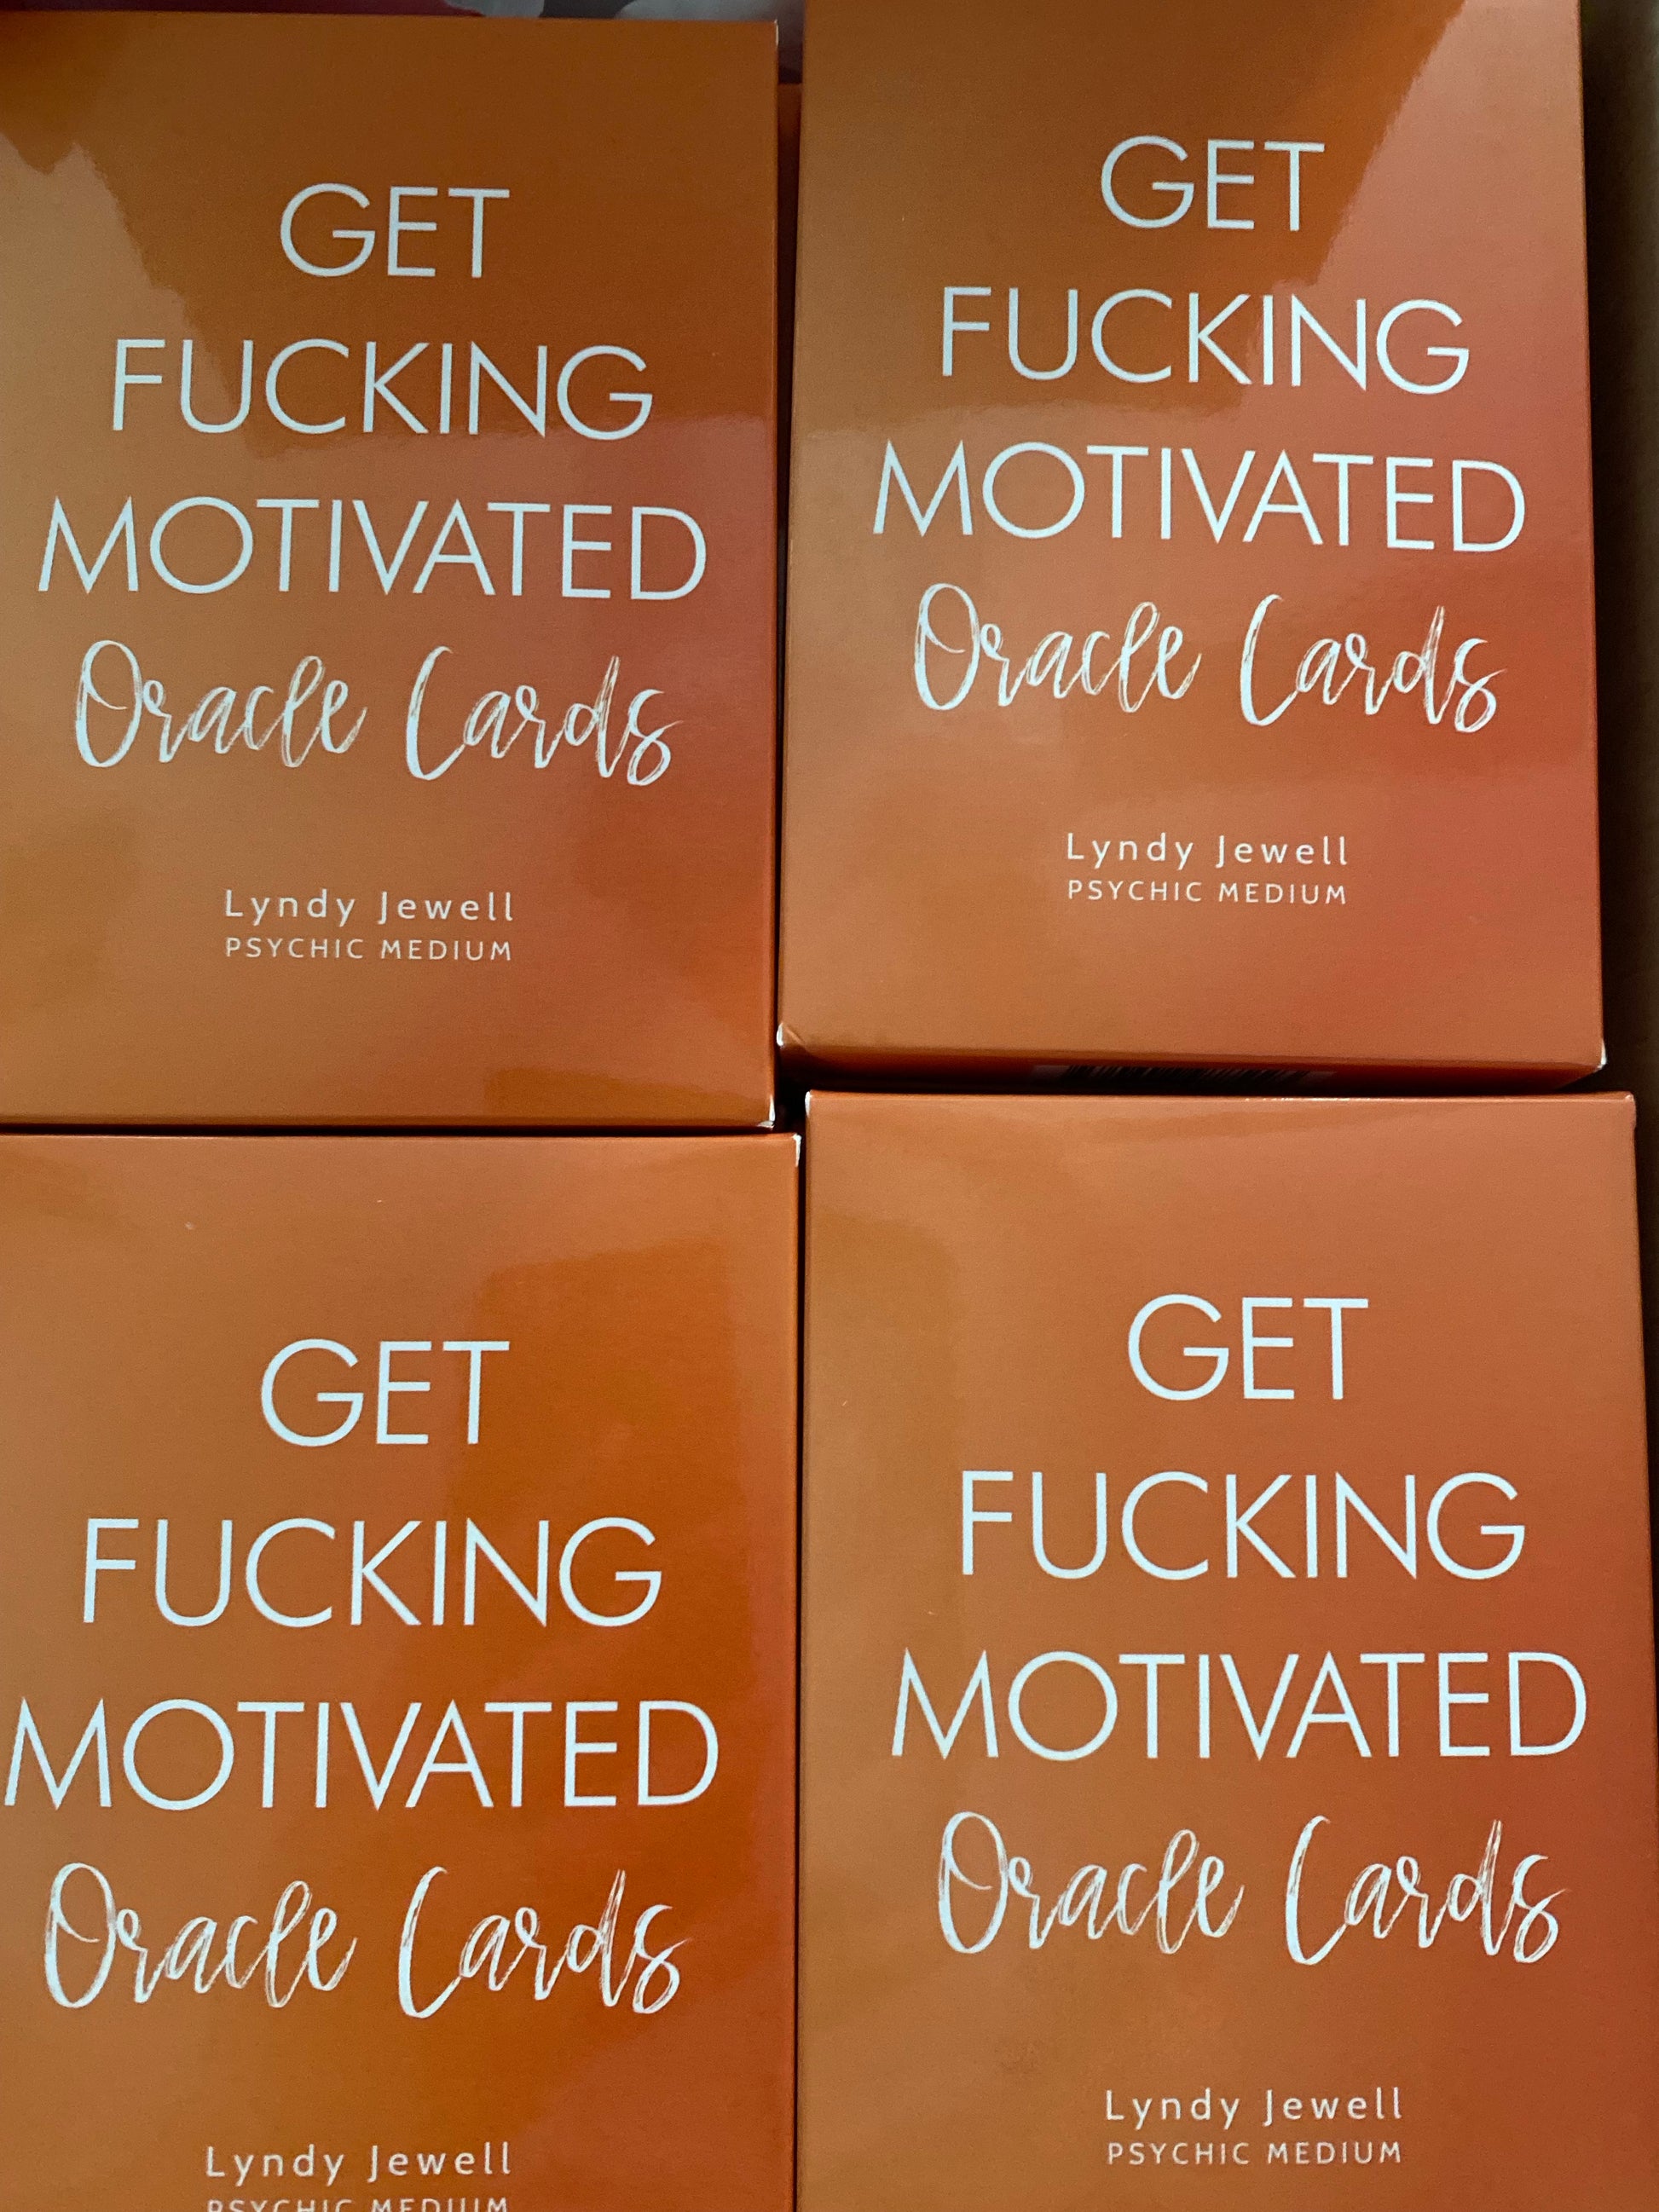 Get fucking motivated oracle card